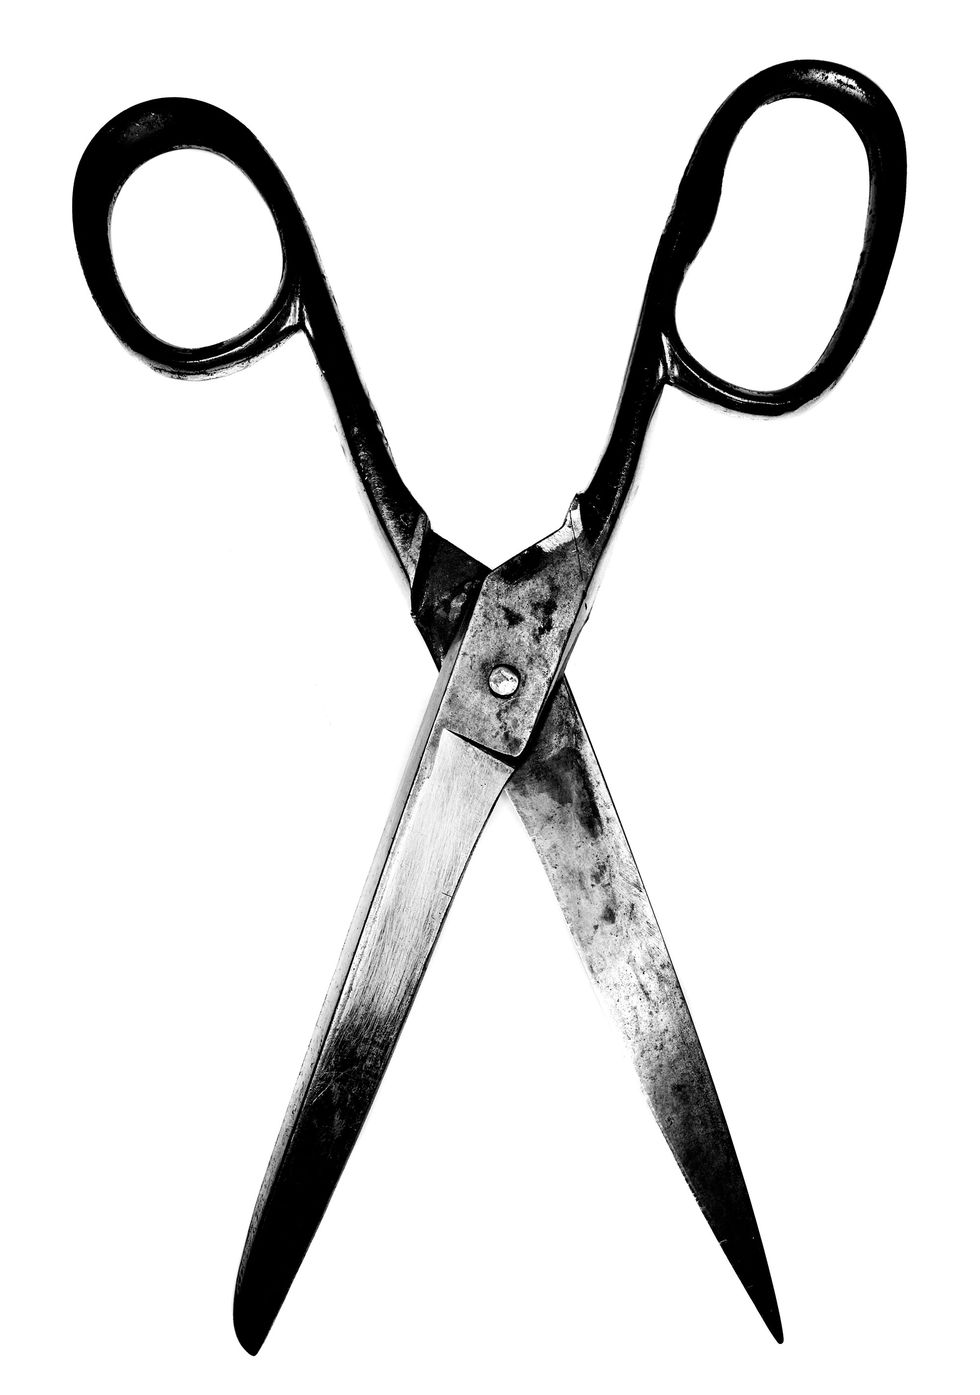 Woman chops off her cheating husband's penis with scissors TWICE